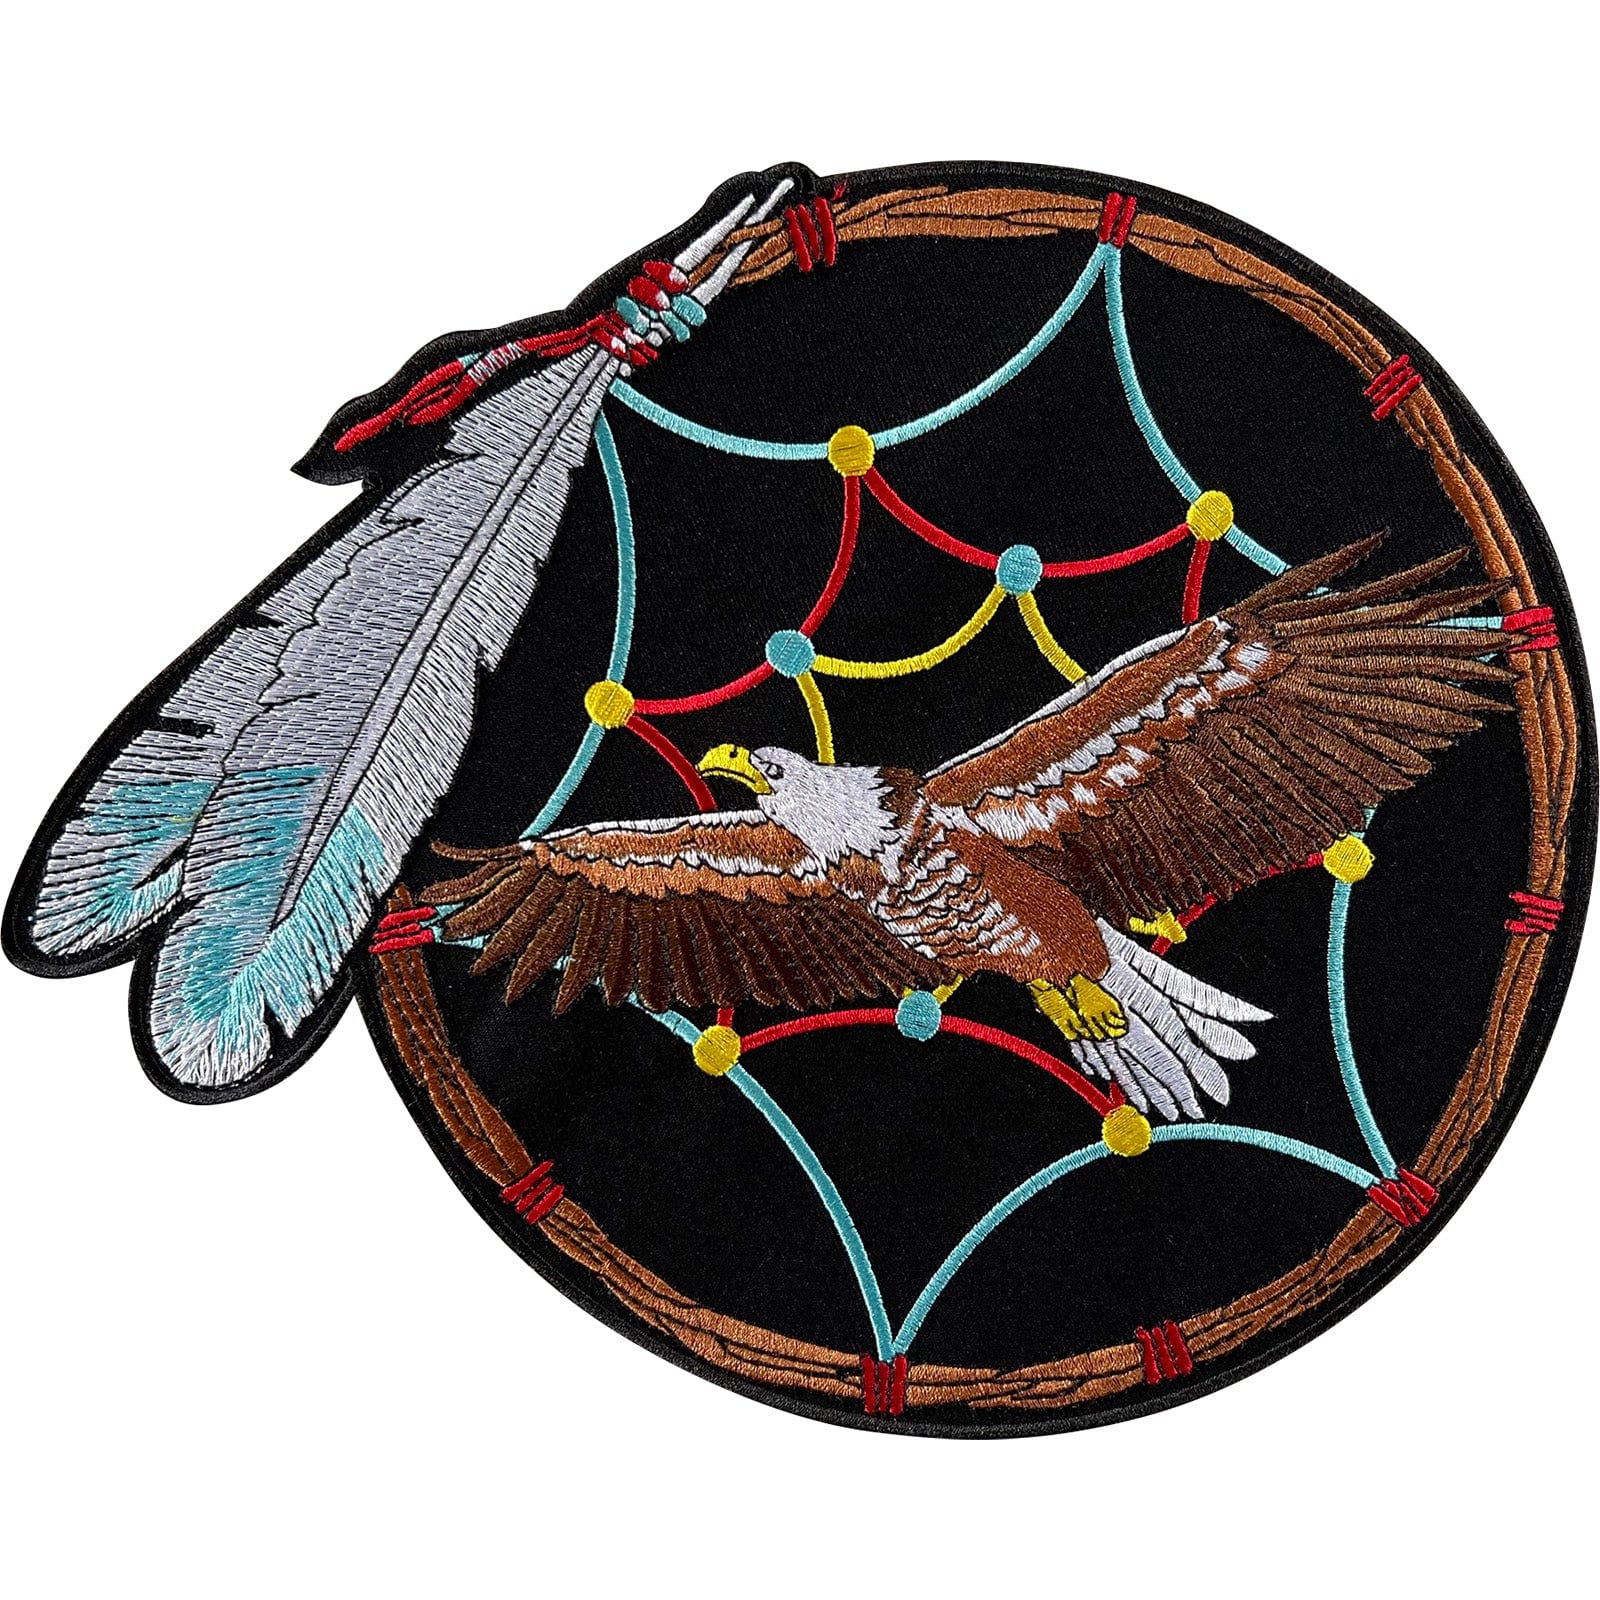 Big Large Iron Sew On Patch Eagle Indian Feather Dreamcatcher Embroidery Badge